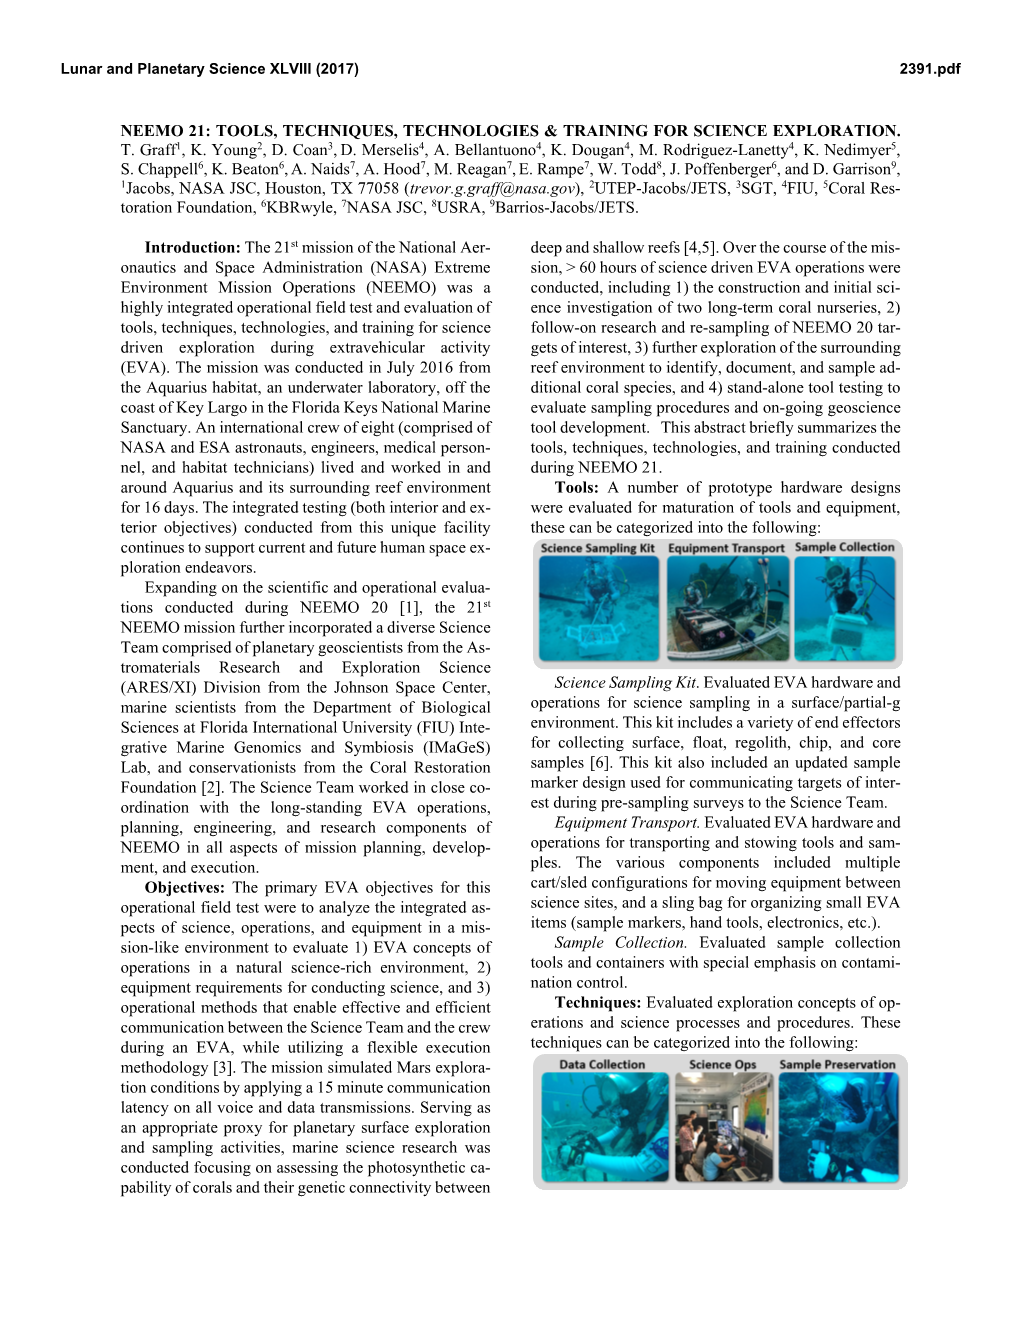 NEEMO 21: TOOLS, TECHNIQUES, TECHNOLOGIES & TRAINING for SCIENCE EXPLORATION. T. Graff1, K. Young2, D. Coan3, D. Merselis 4